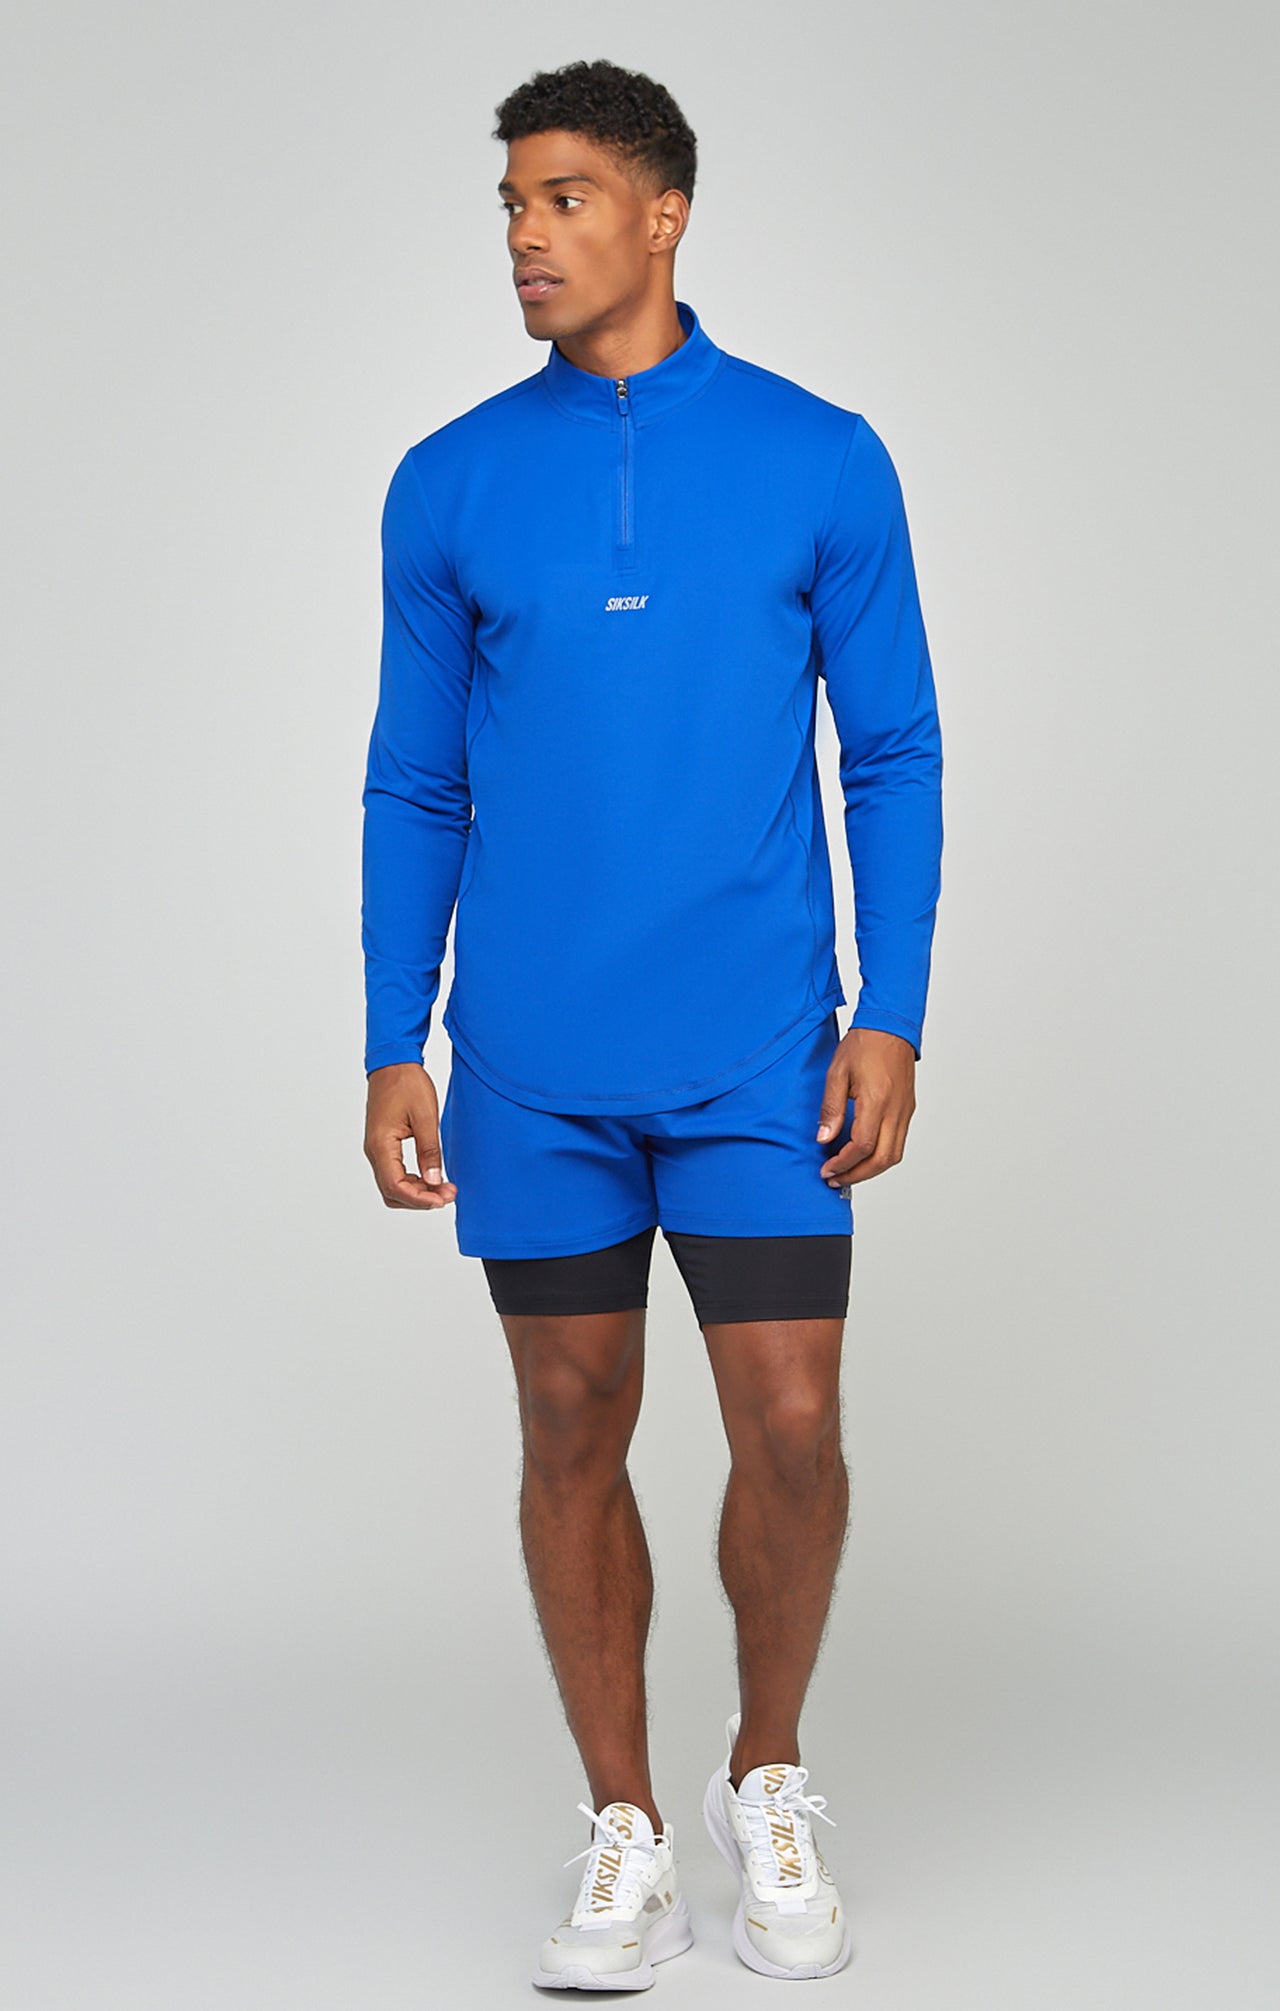 Blue Sports Muscle Fit Quarter Zip Long Sleeve Top (3)